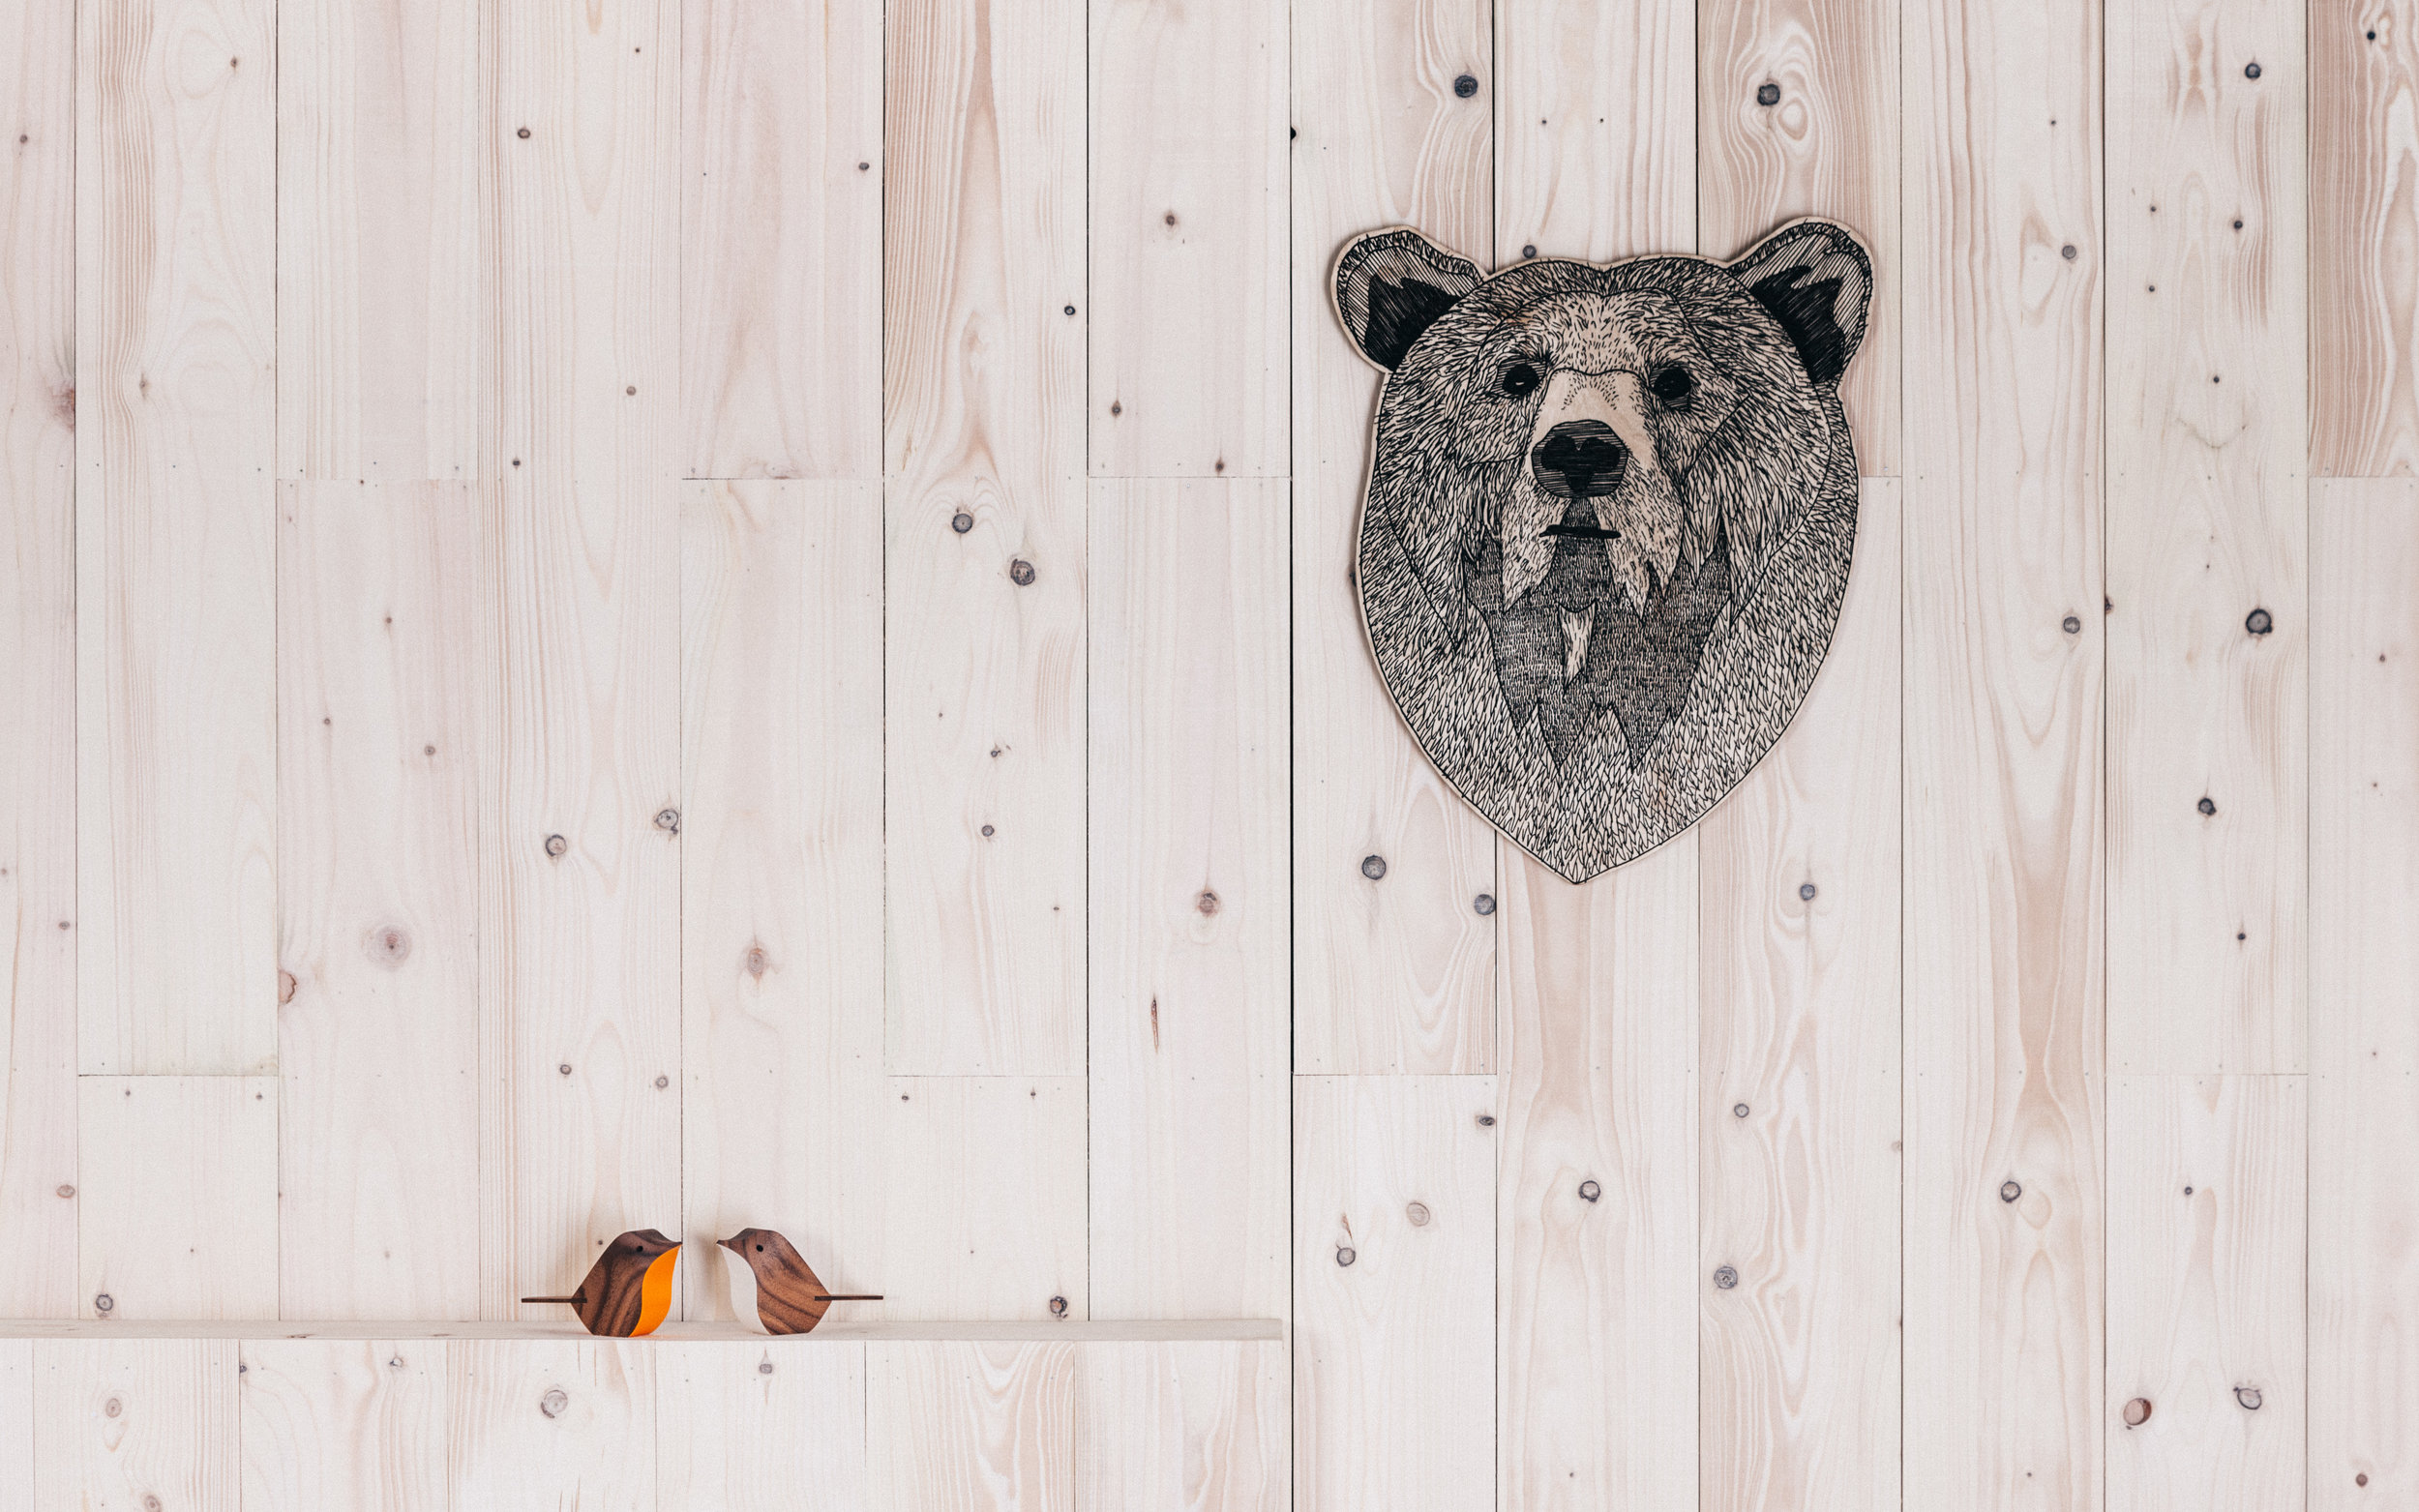 Illustration of a bears head on a piece of plywood, next to two small wooden birds.